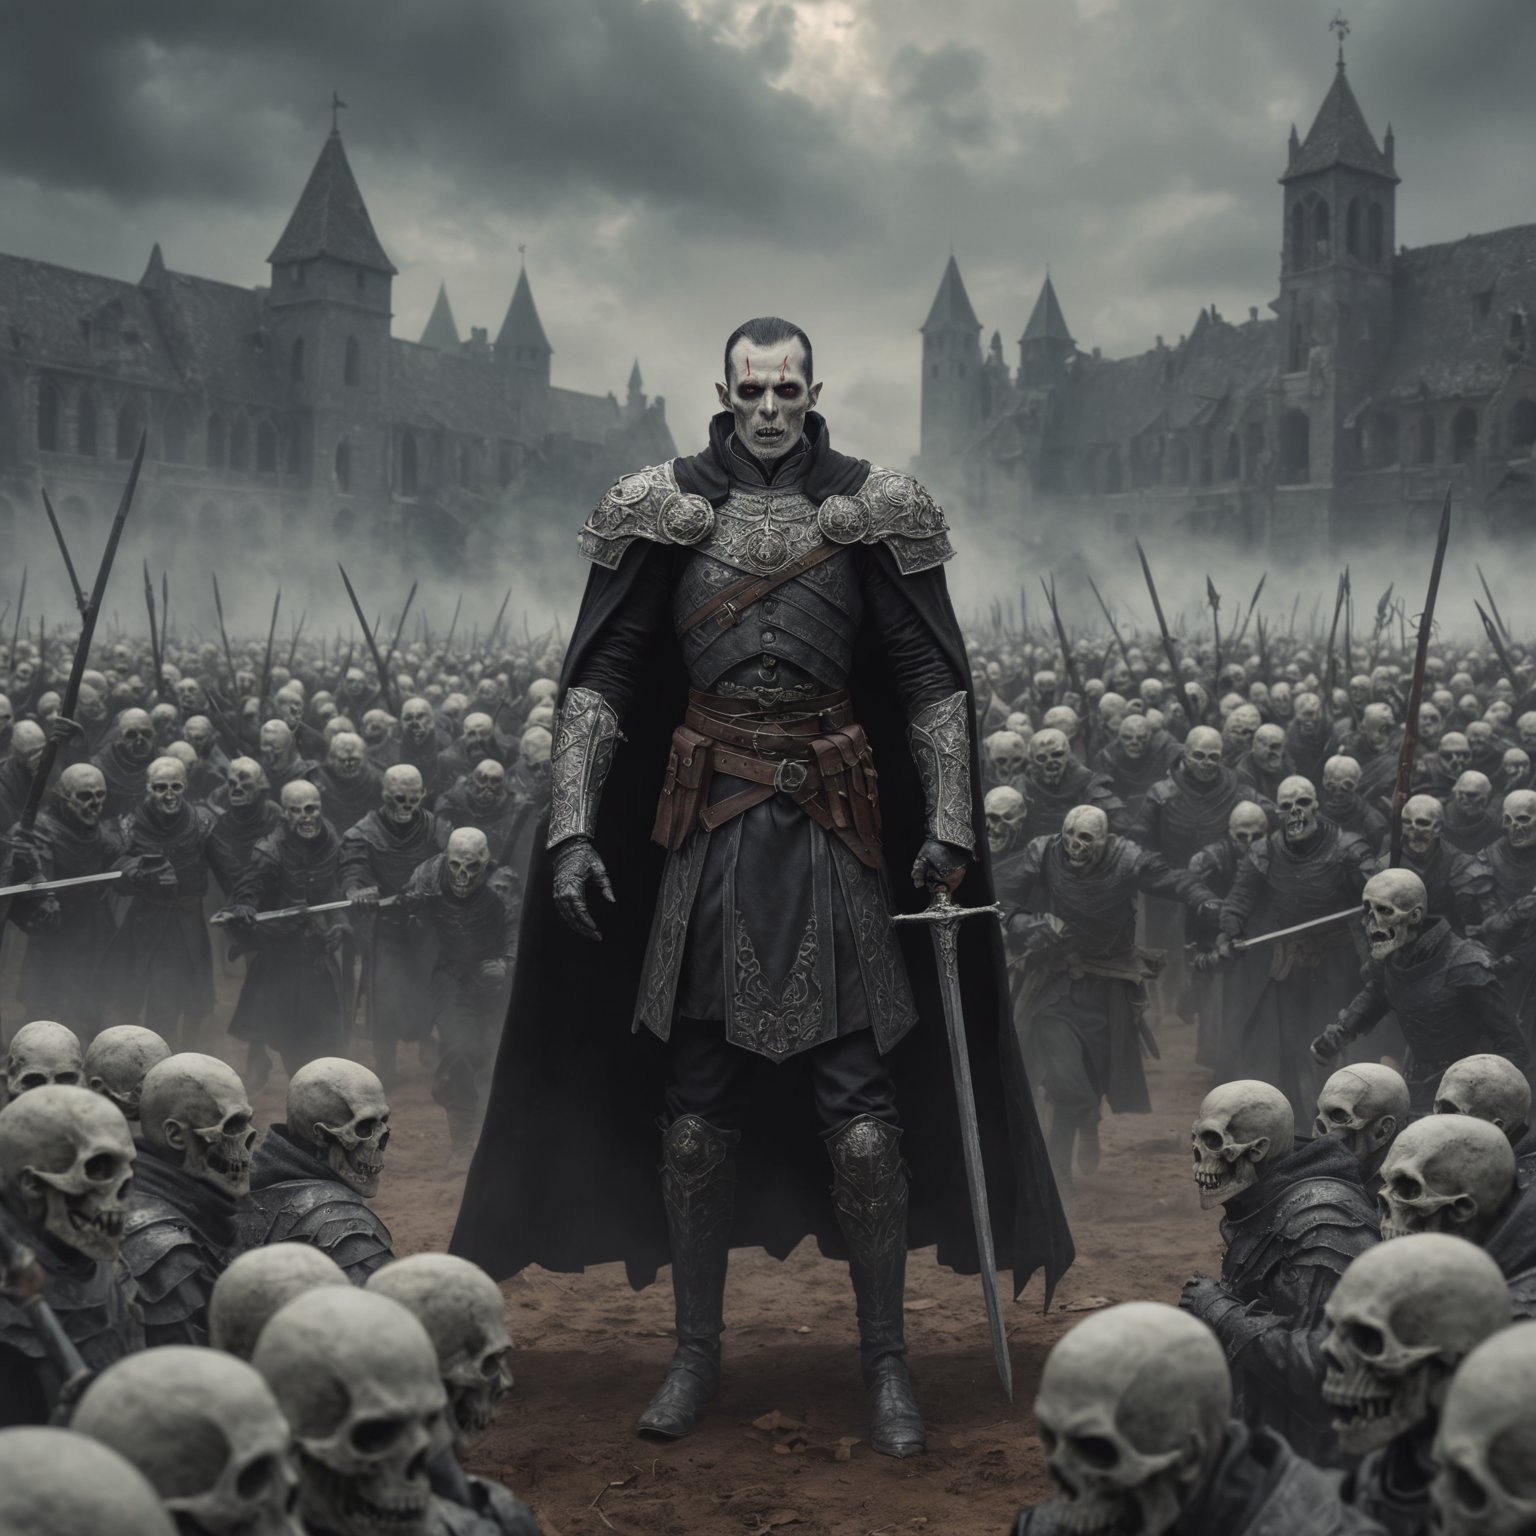 Dracula standing in front of undead army, necromancy, landscape view, marching, intricate detail, realistic